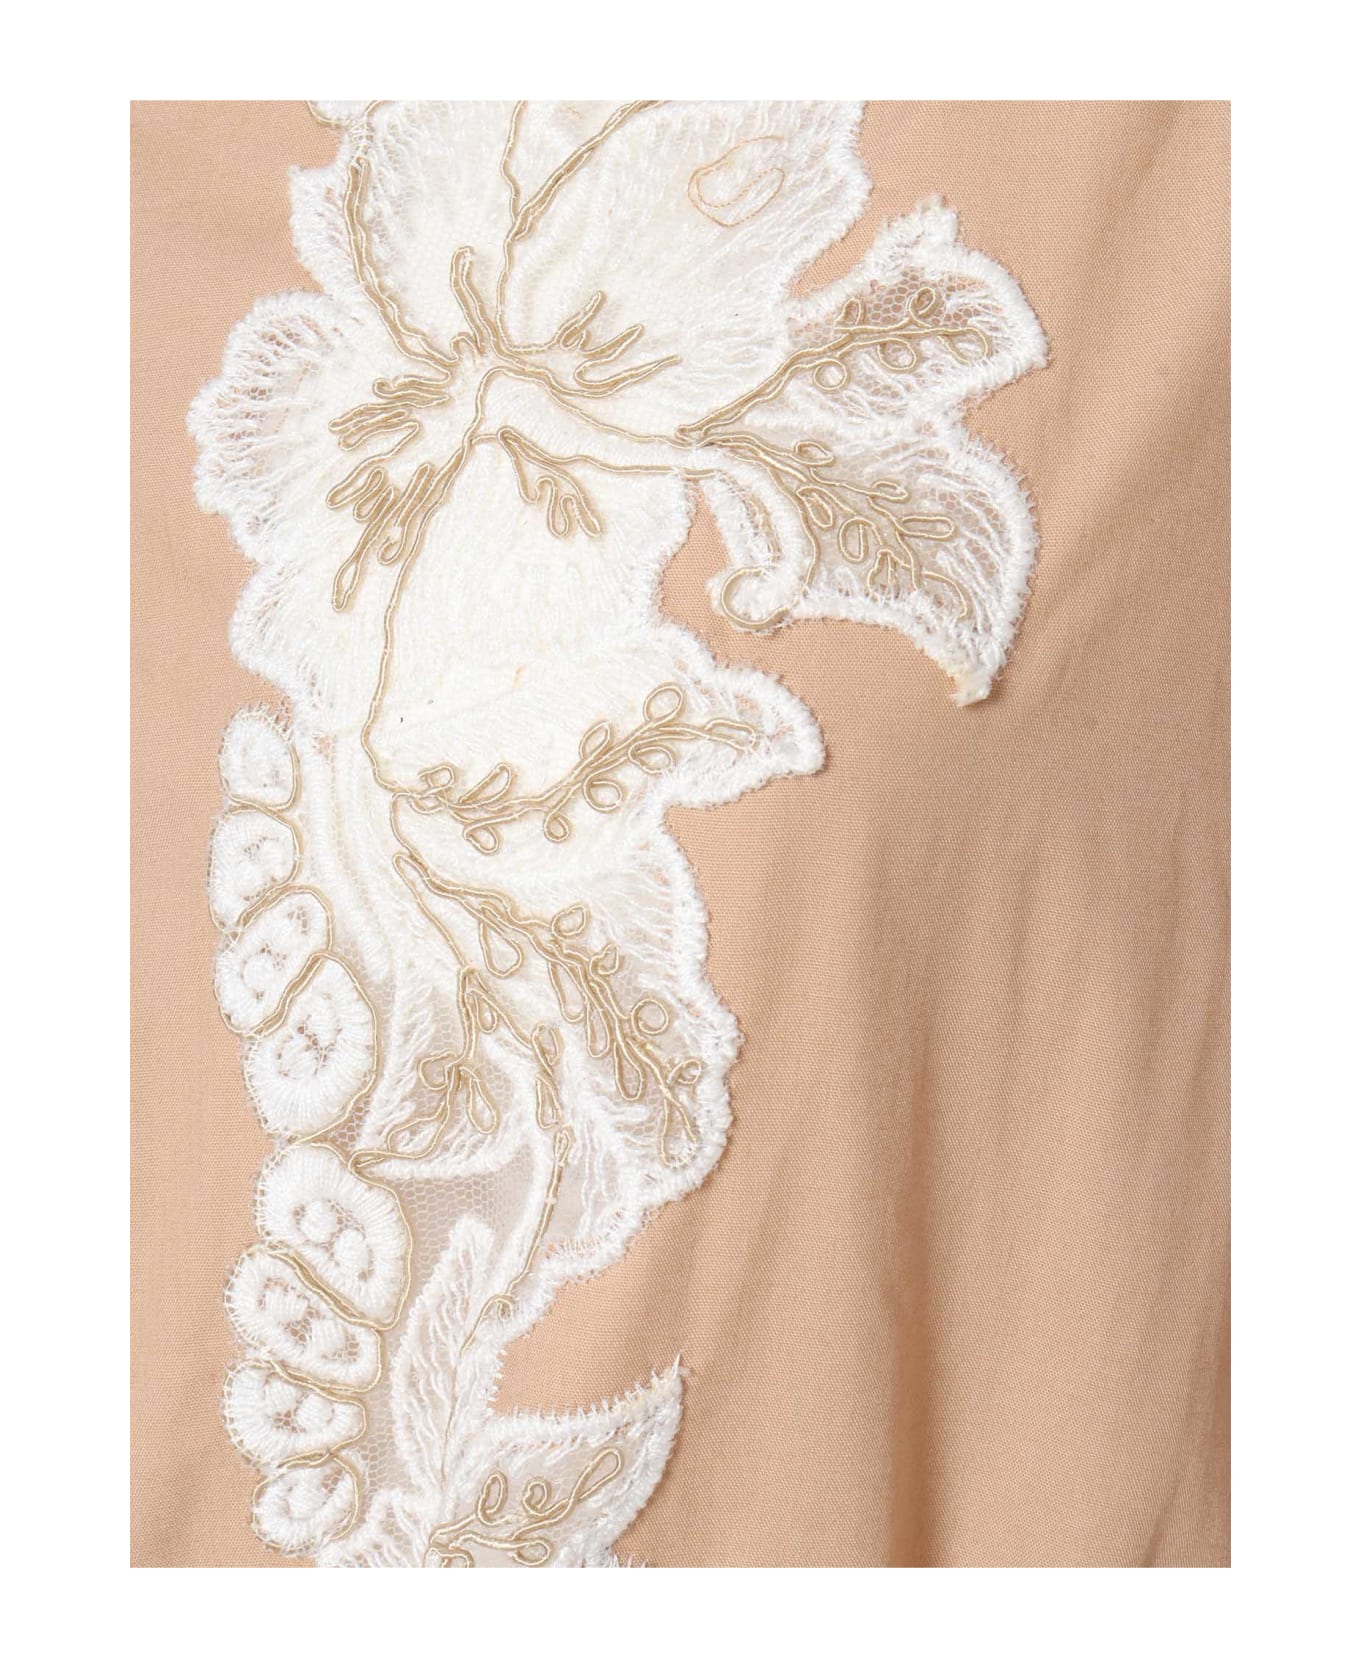 Ermanno Ermanno Scervino Beige Dress With Lace - BROWN